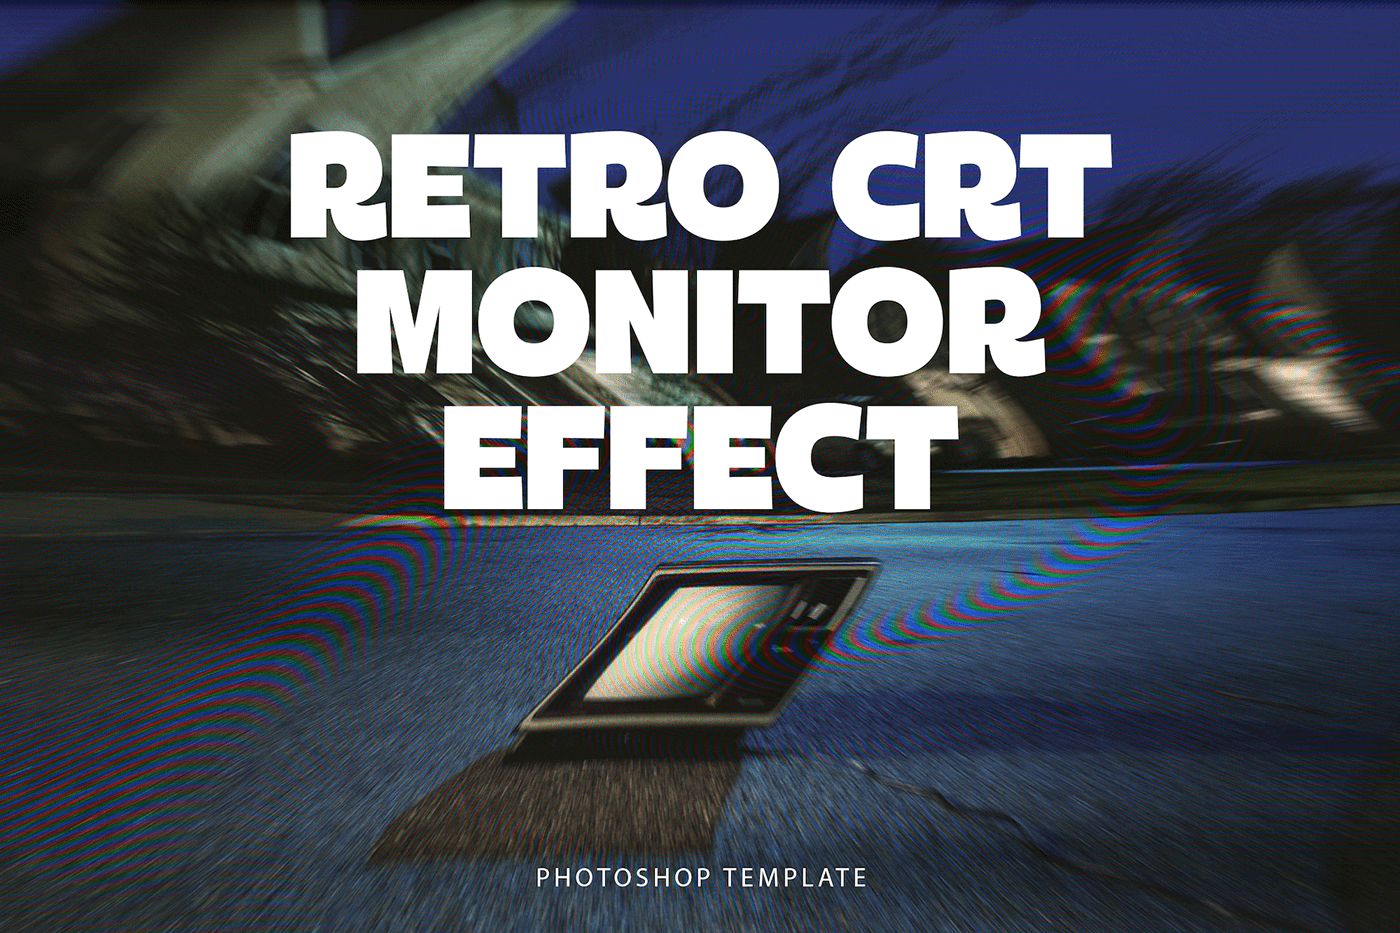 80s CRT free old photo editing poster psd Retro retrowave vintage